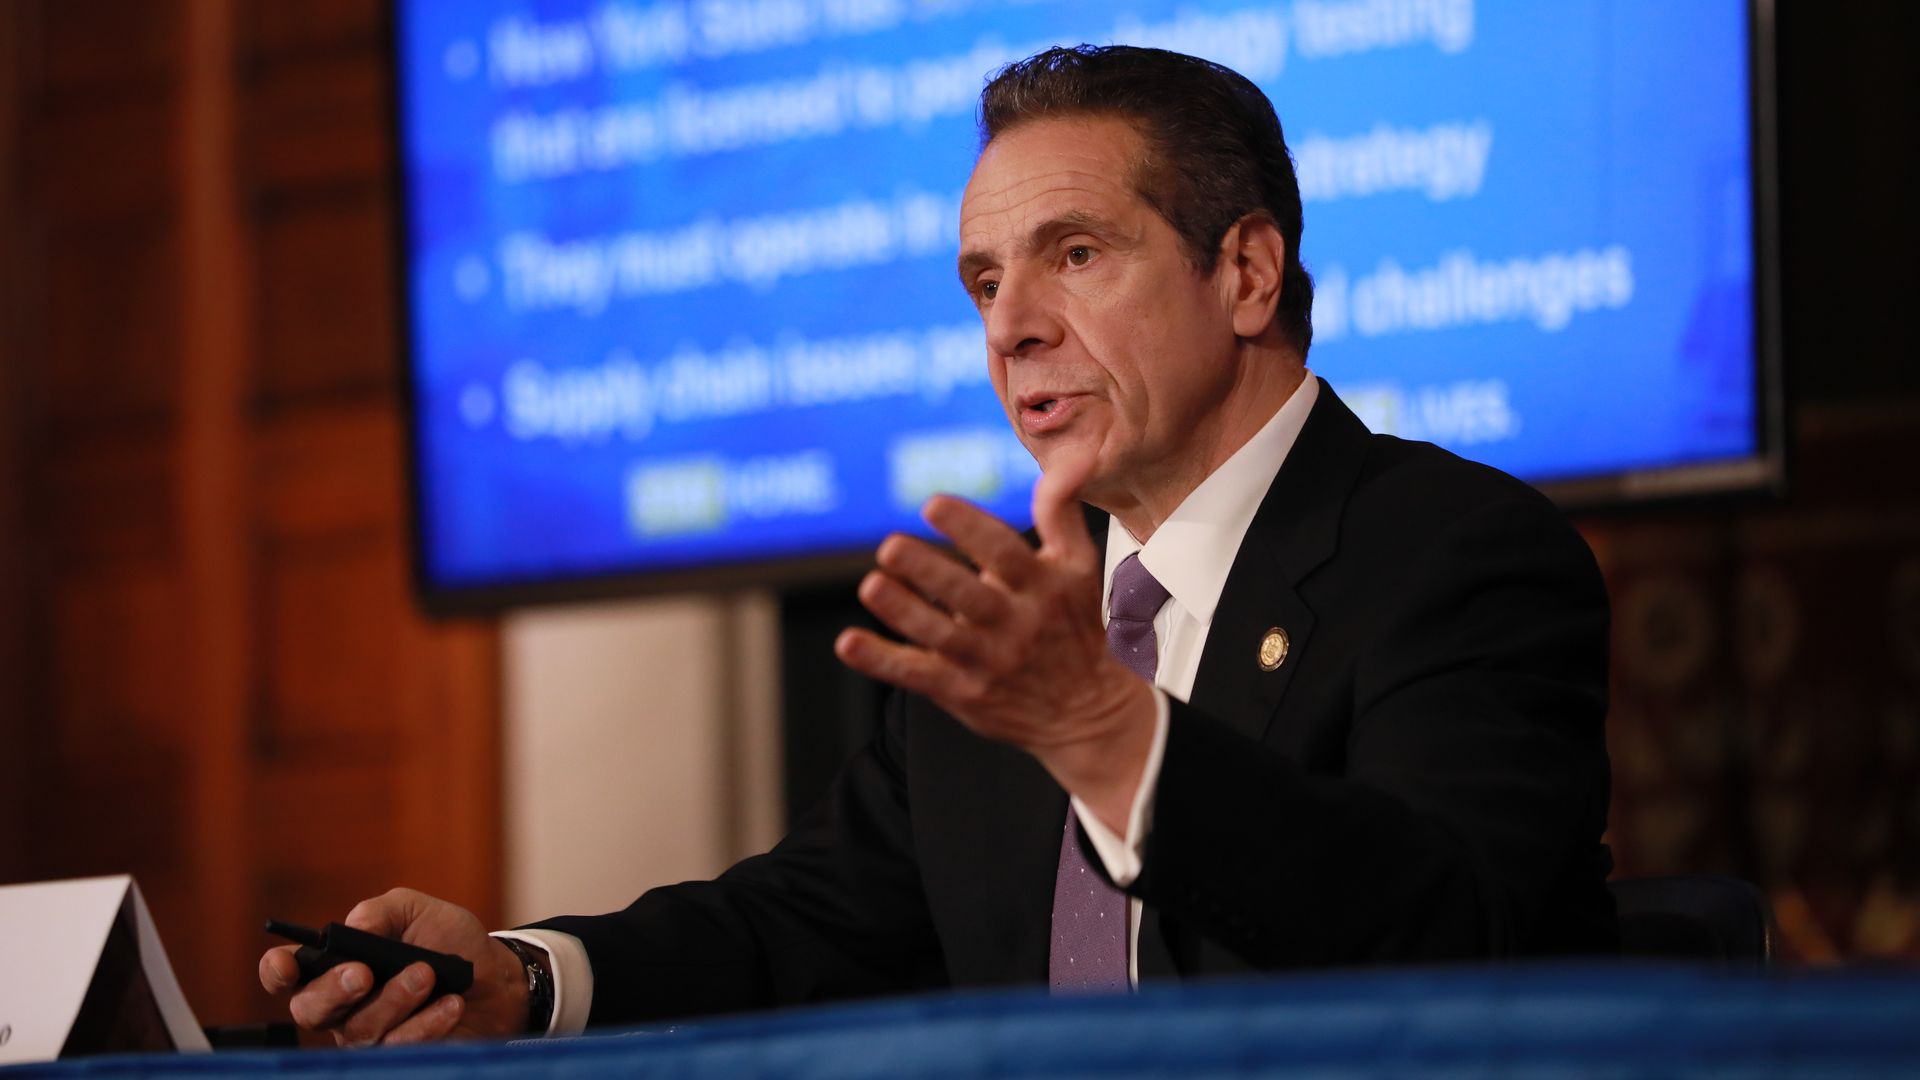 In this image, Gov. Andrew Cuomo talks in front of a presentation screen